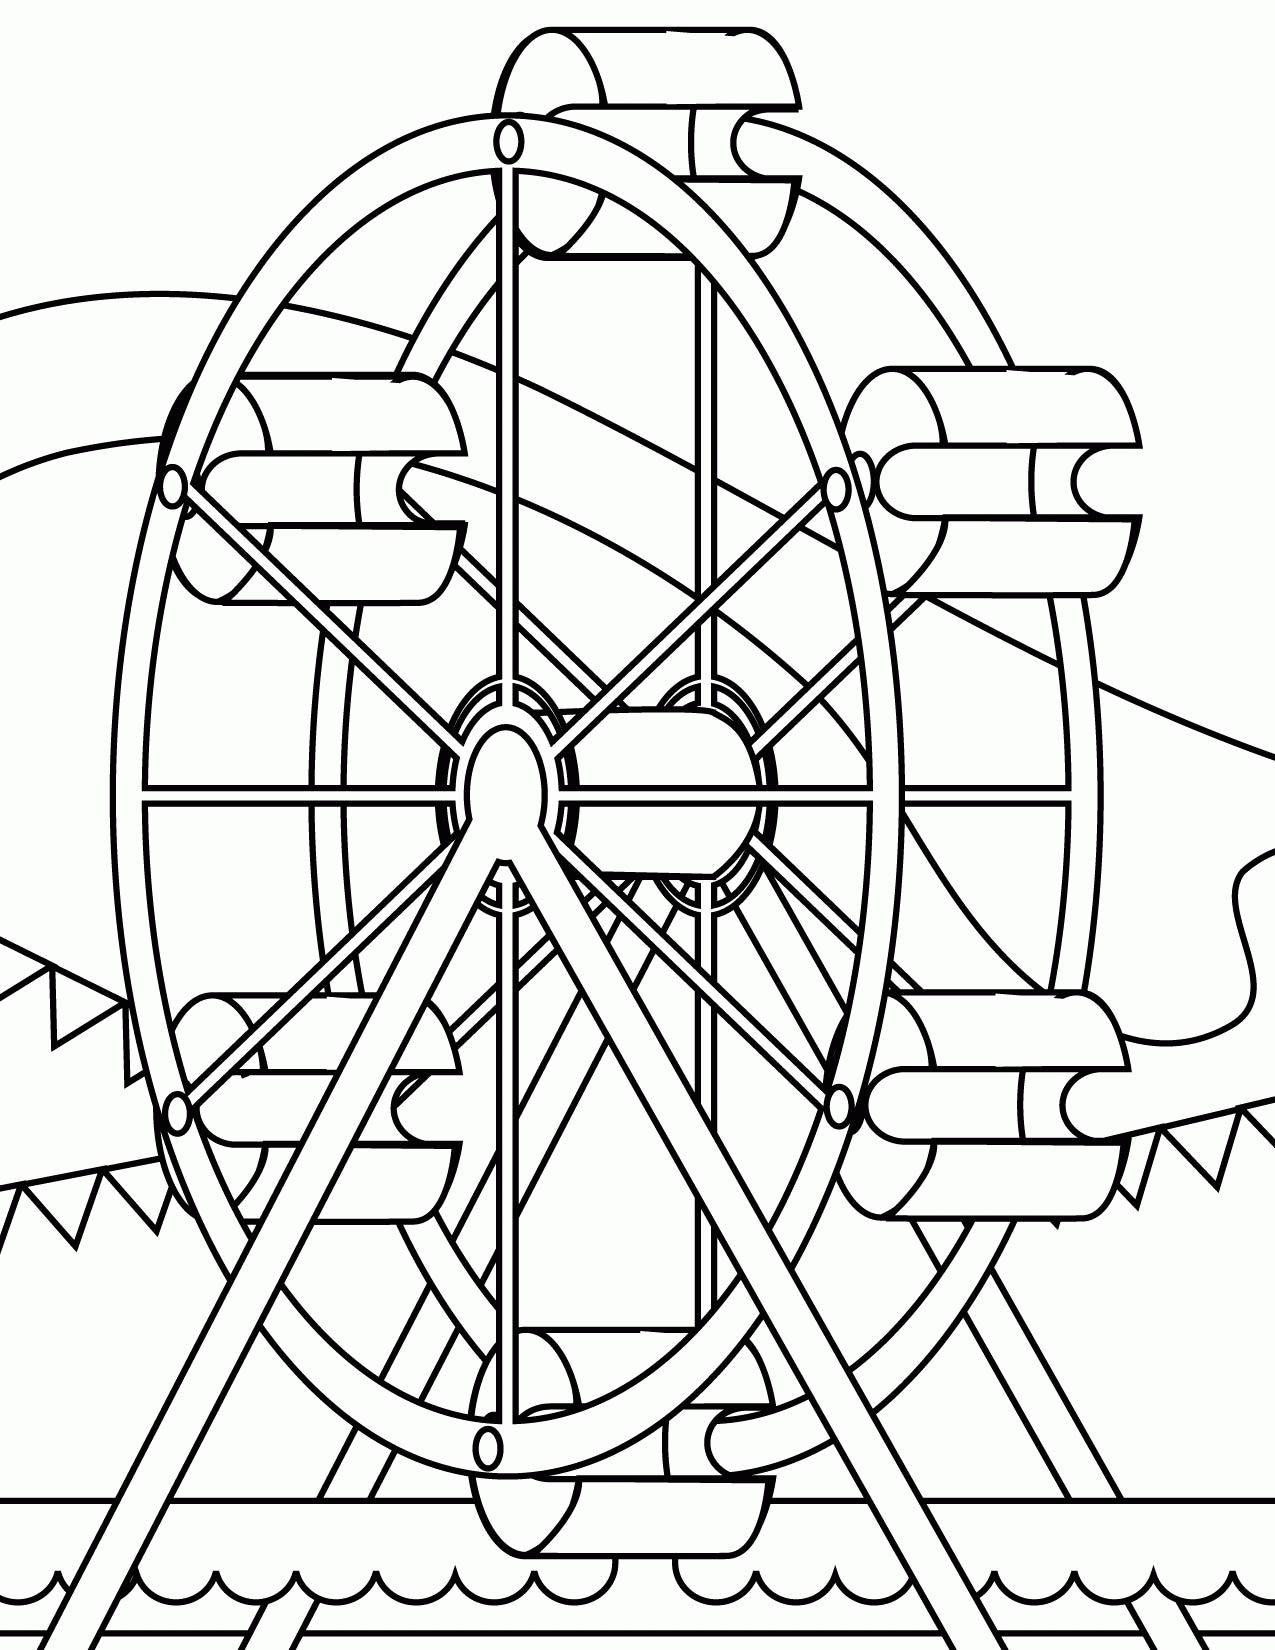 Final Year Project 2  Wheel art Ferris wheel Coloring pages